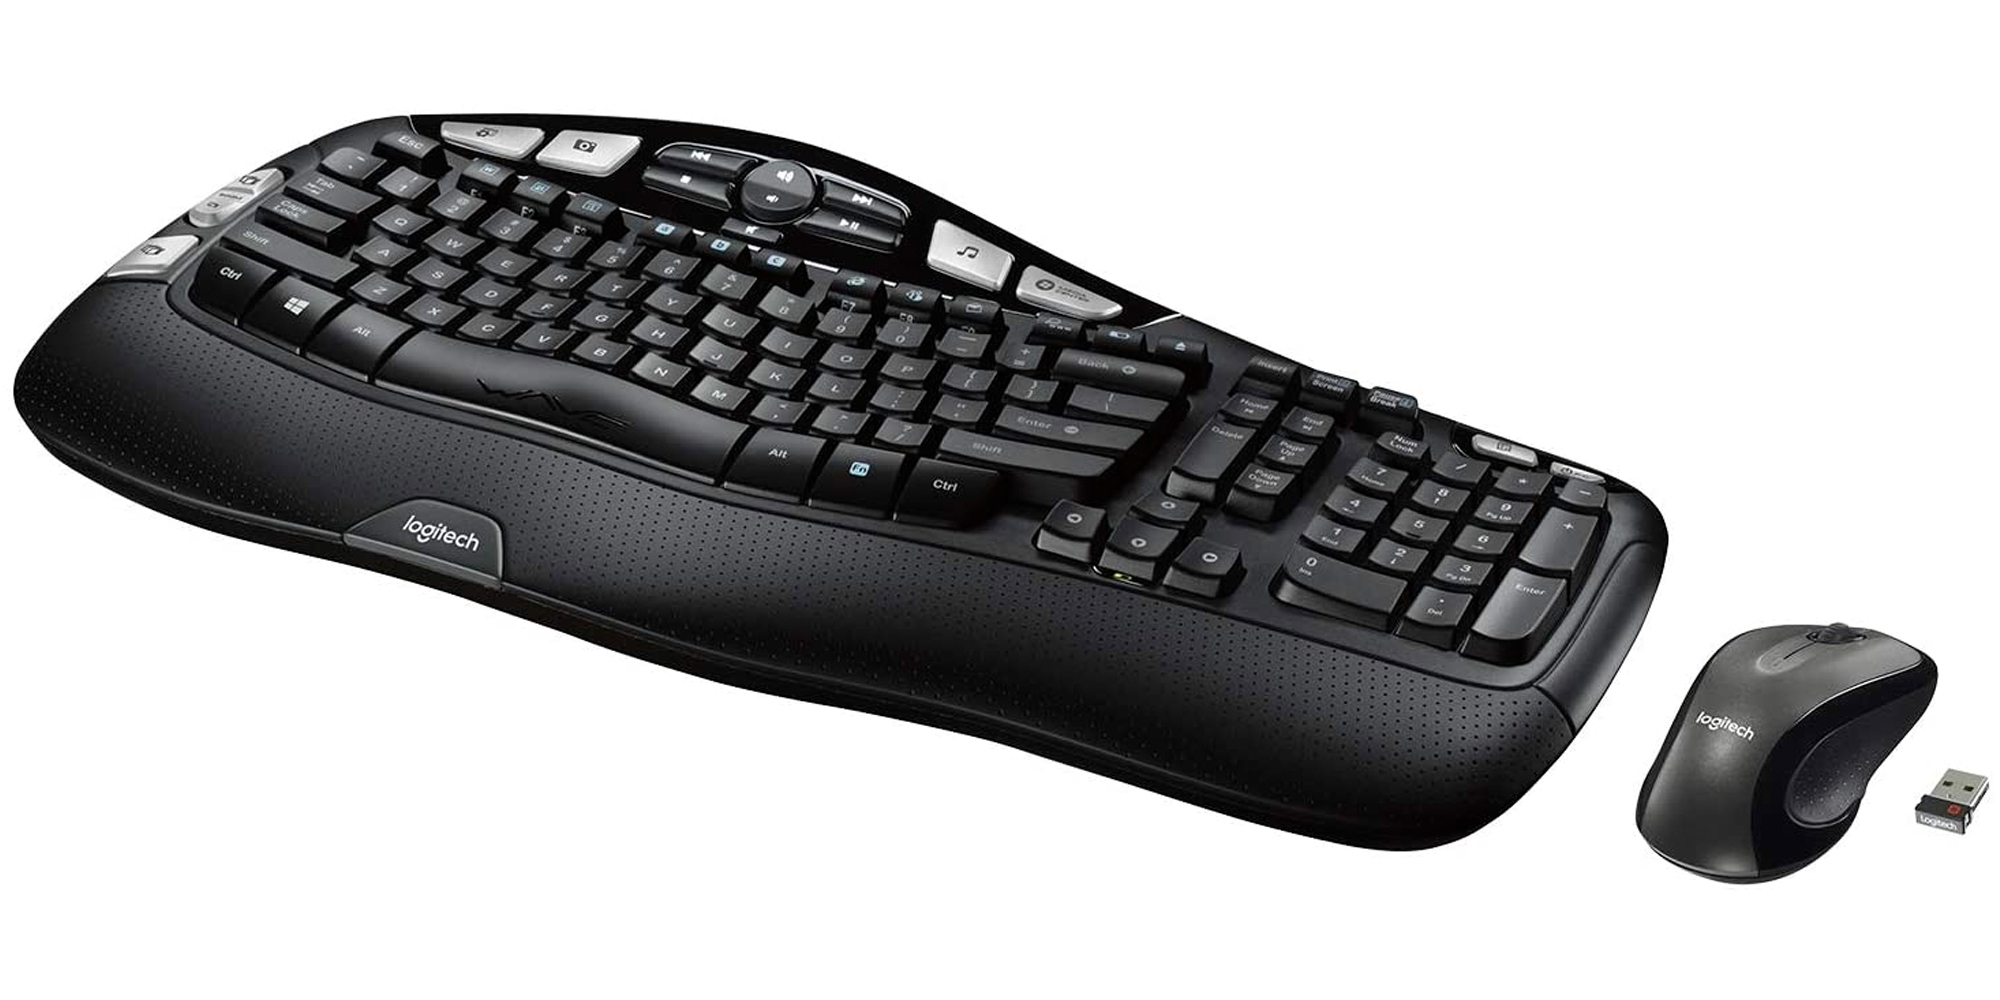 Logitech's wireless keyboard/mouse combo drops to second-best price at